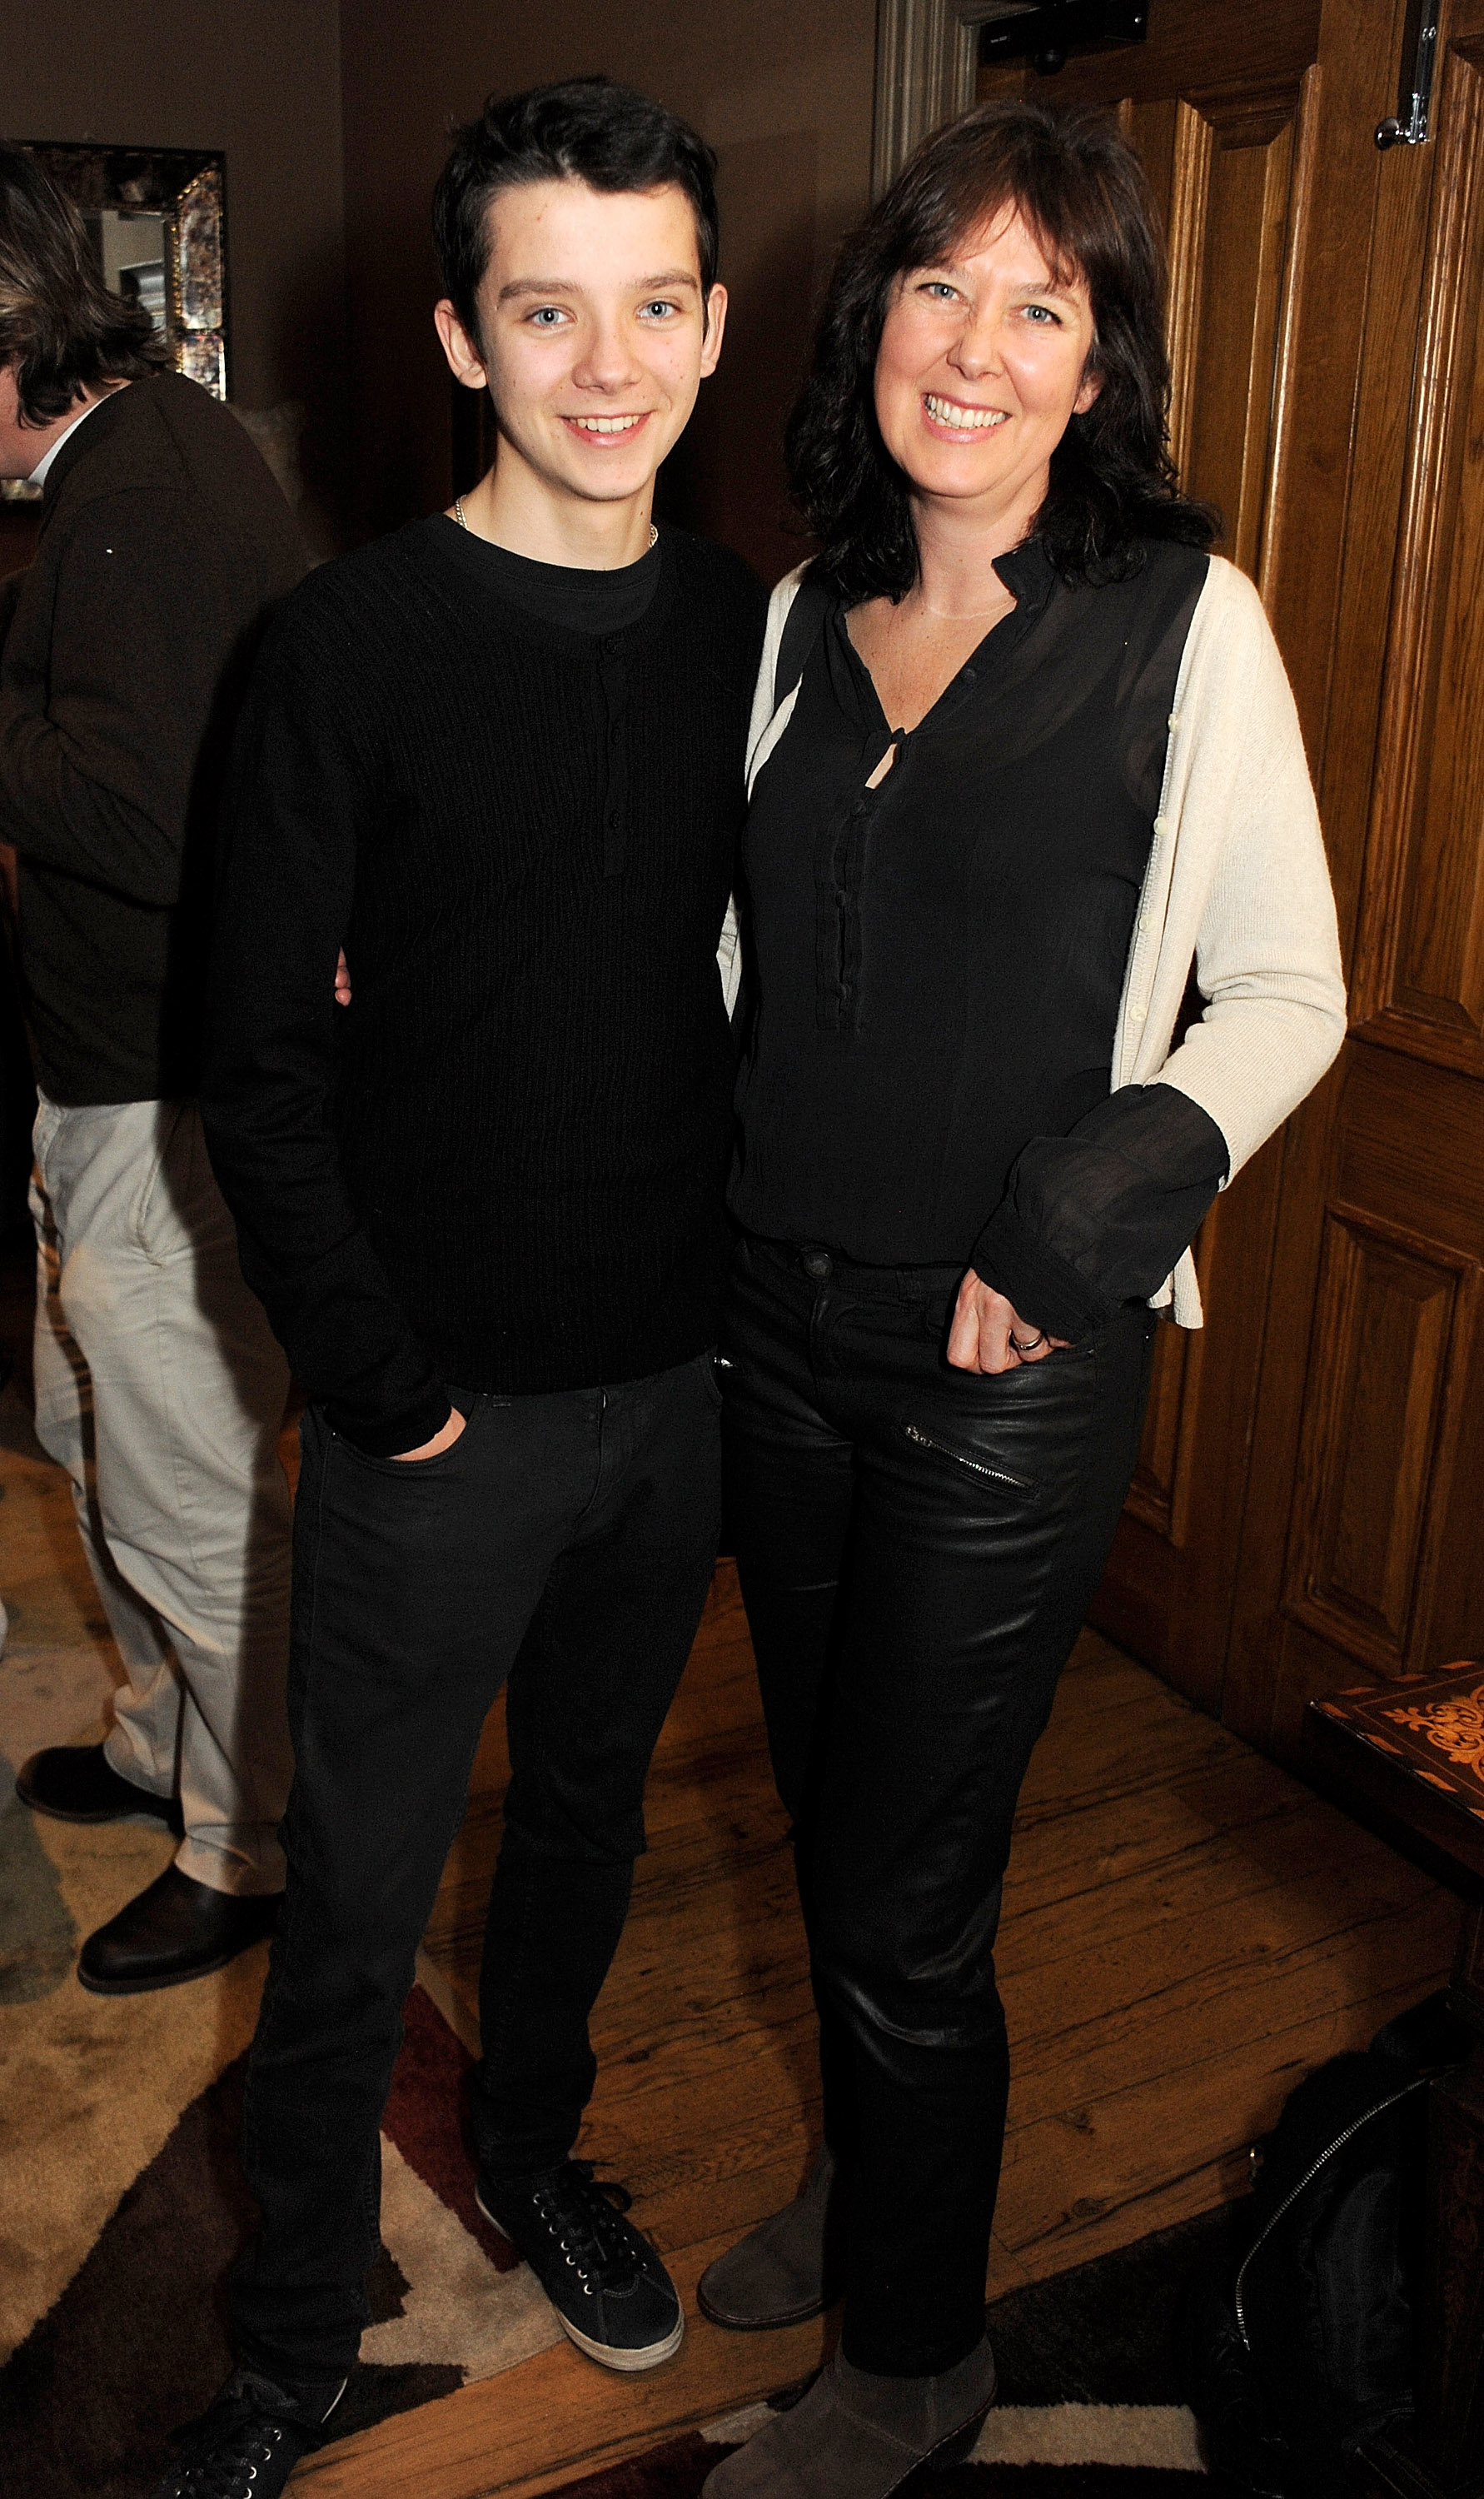 Asa Butterfield (L) and his mother, Jacqueline Farr, attend a screening of 'Silver Linings Playbook' hosted by Harvey Weinstein at the Charlotte Street Hotel on December 16, 2012, in London, England. | Source: Getty Images